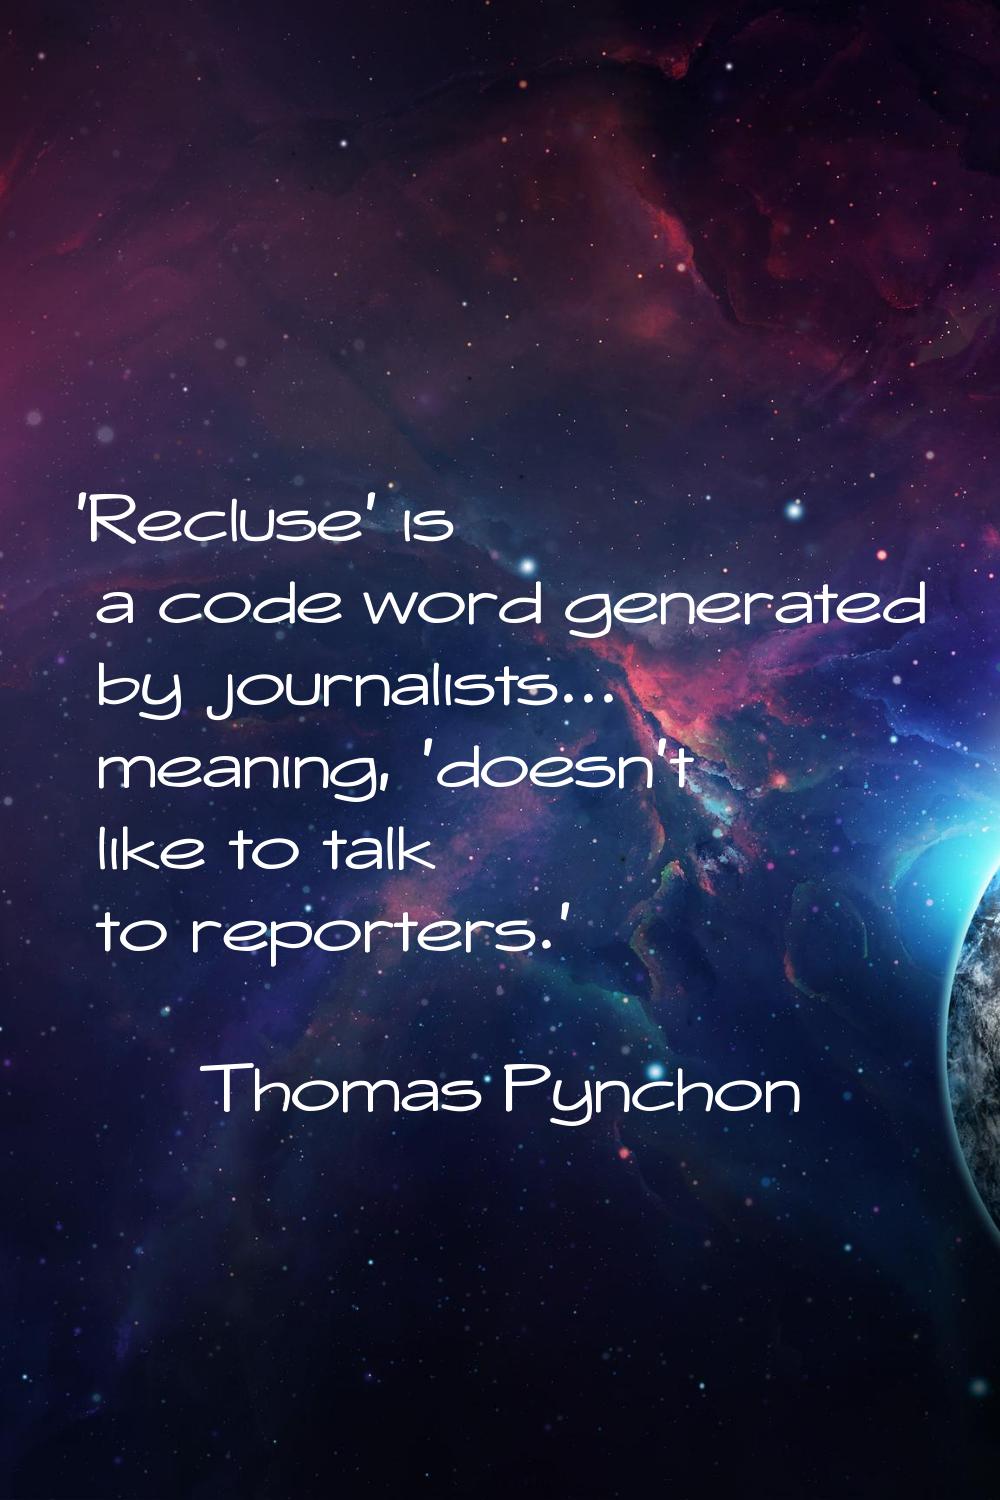 'Recluse' is a code word generated by journalists... meaning, 'doesn't like to talk to reporters.'